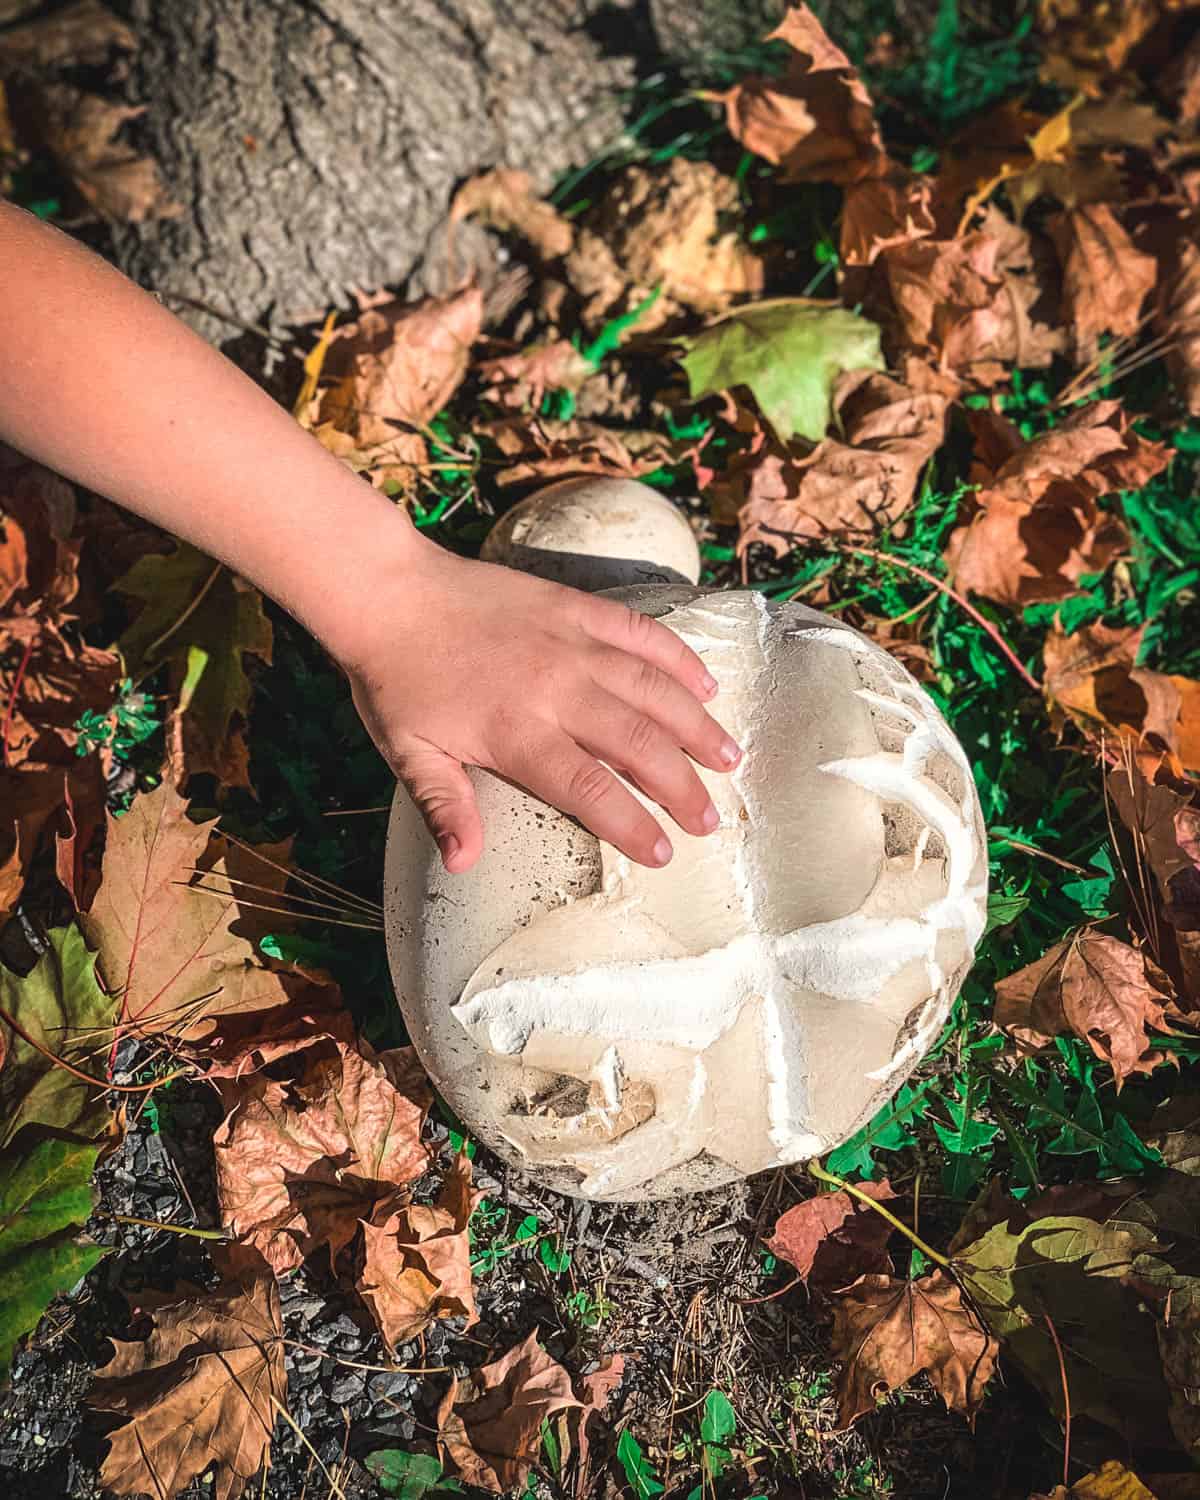 a child's hand next to a giant puffball mushroom